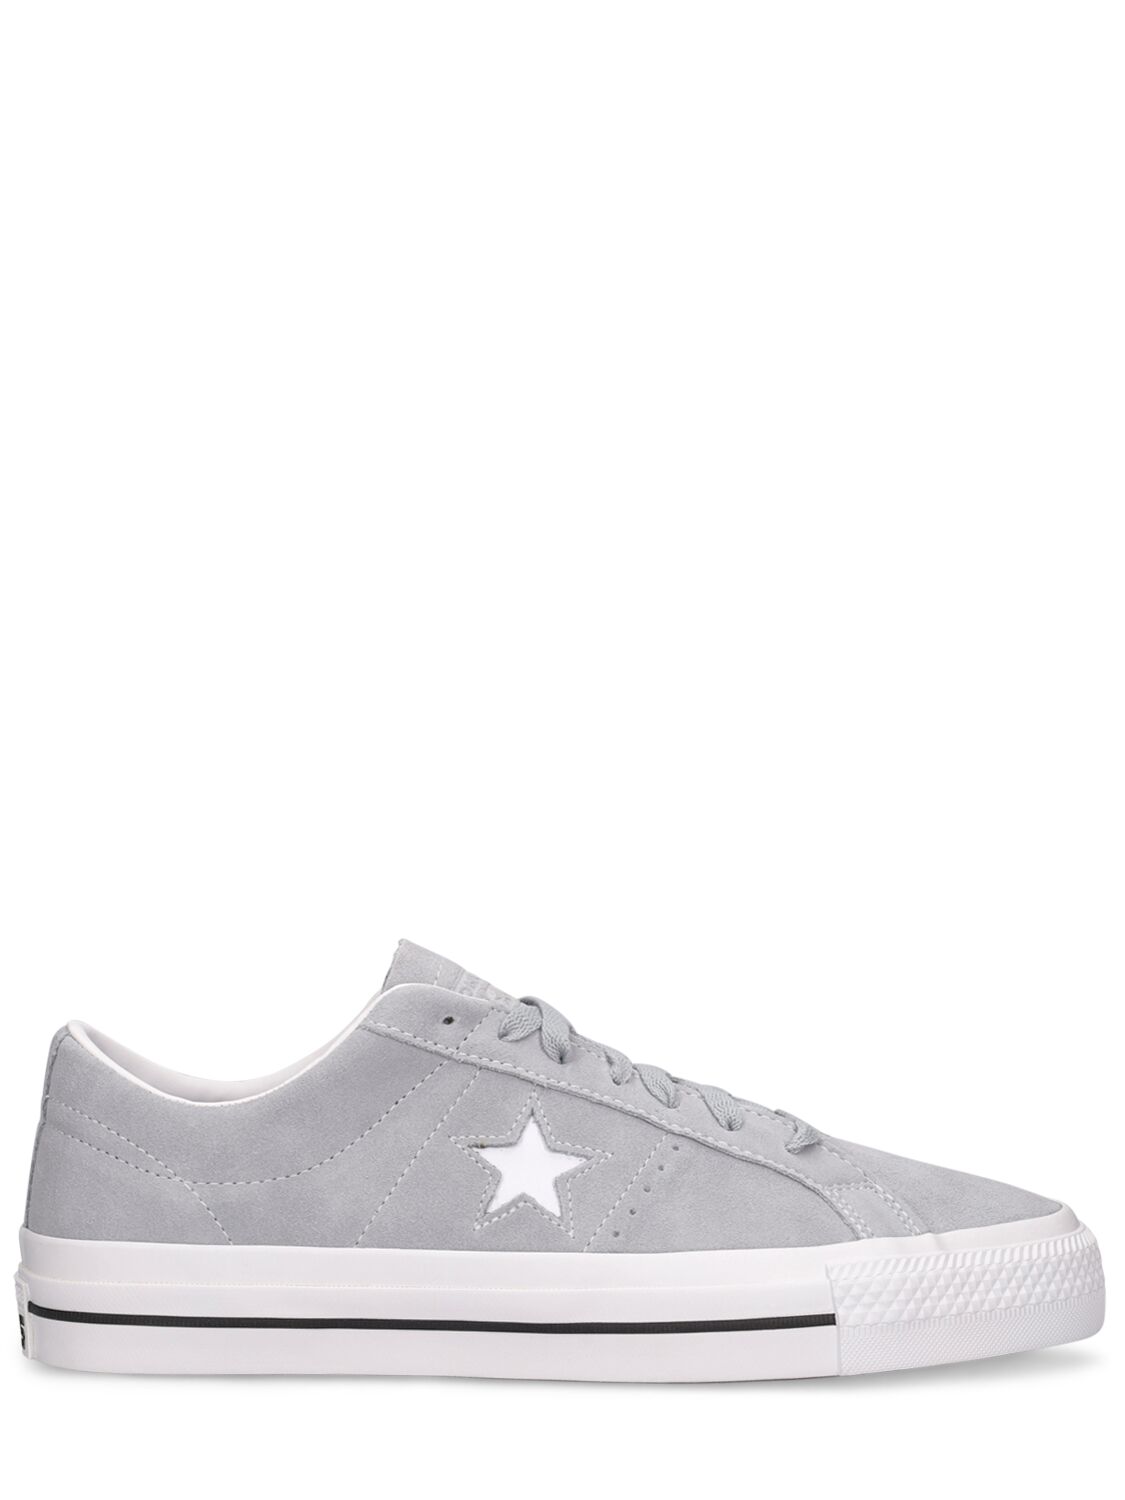 Cons One Star Pro Fall Tone Sneakers – WOMEN > SHOES > SNEAKERS